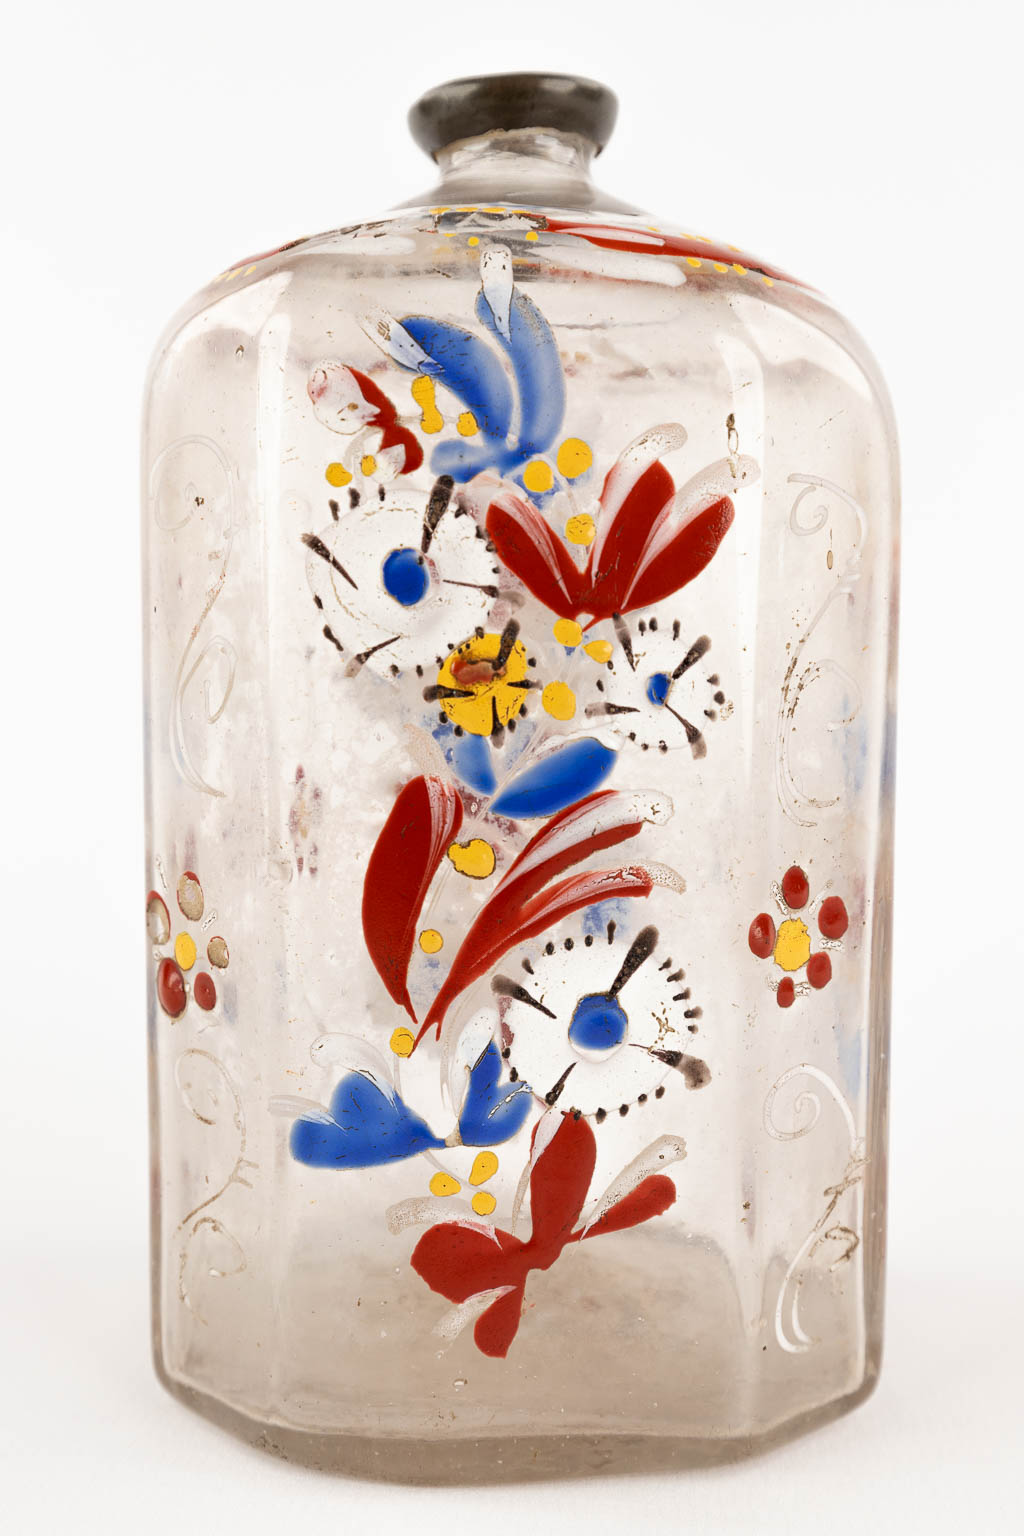 Two antique enamel hand-painted glass bottles, 17th/18th C. (H:13 cm)